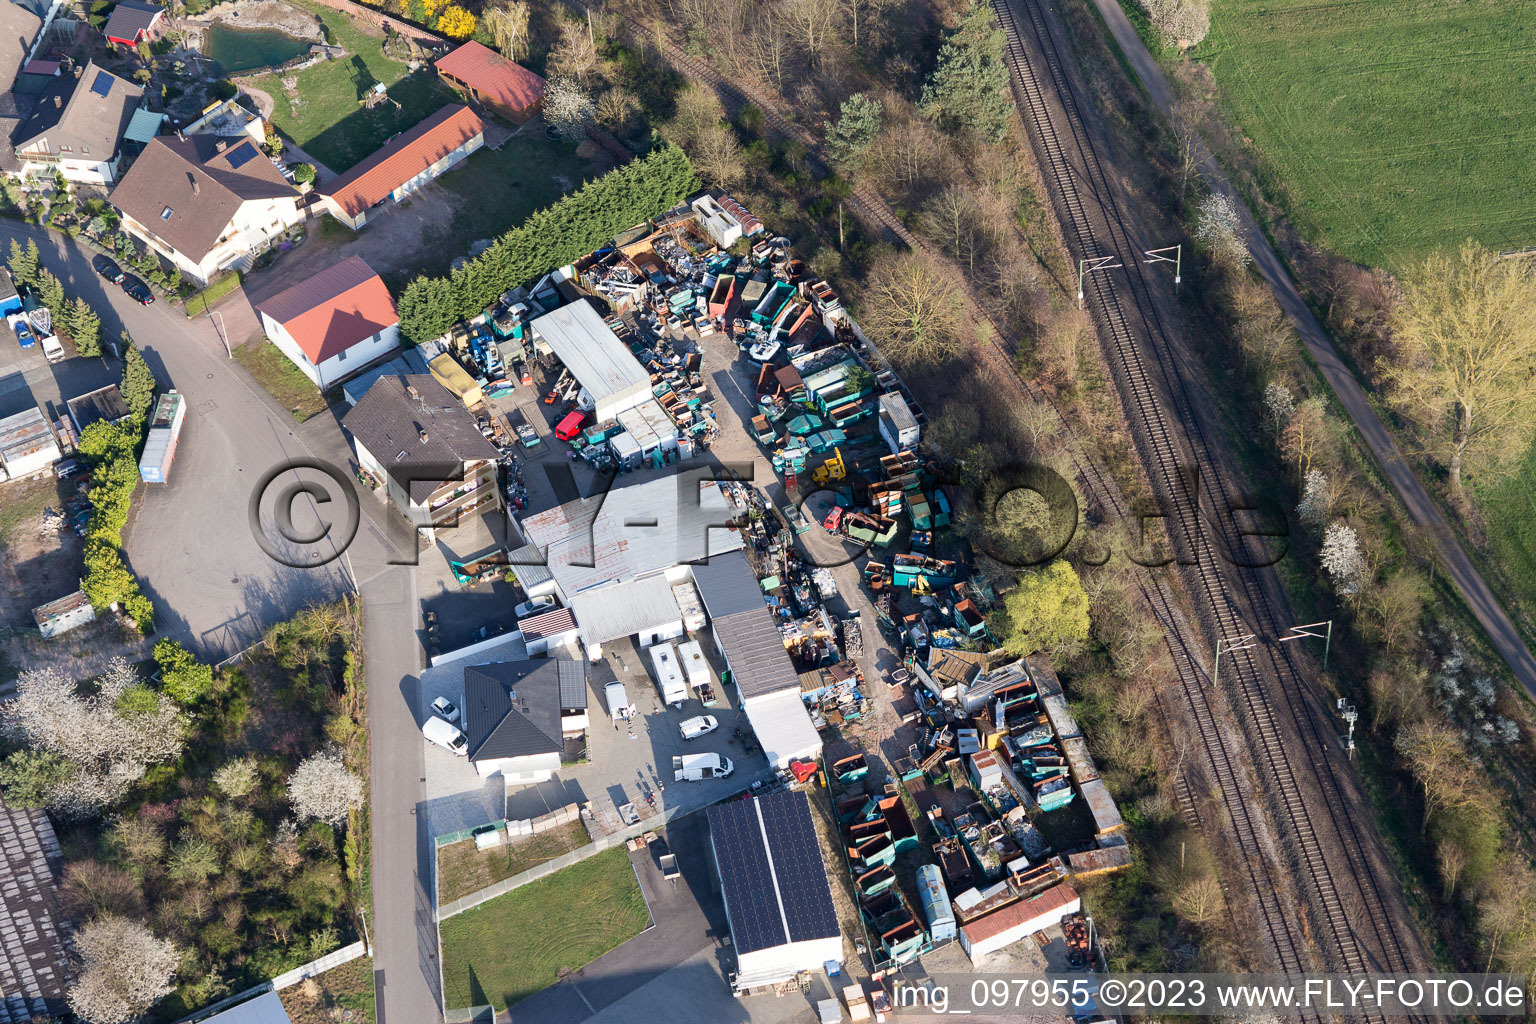 Drone image of Bellheim in the state Rhineland-Palatinate, Germany